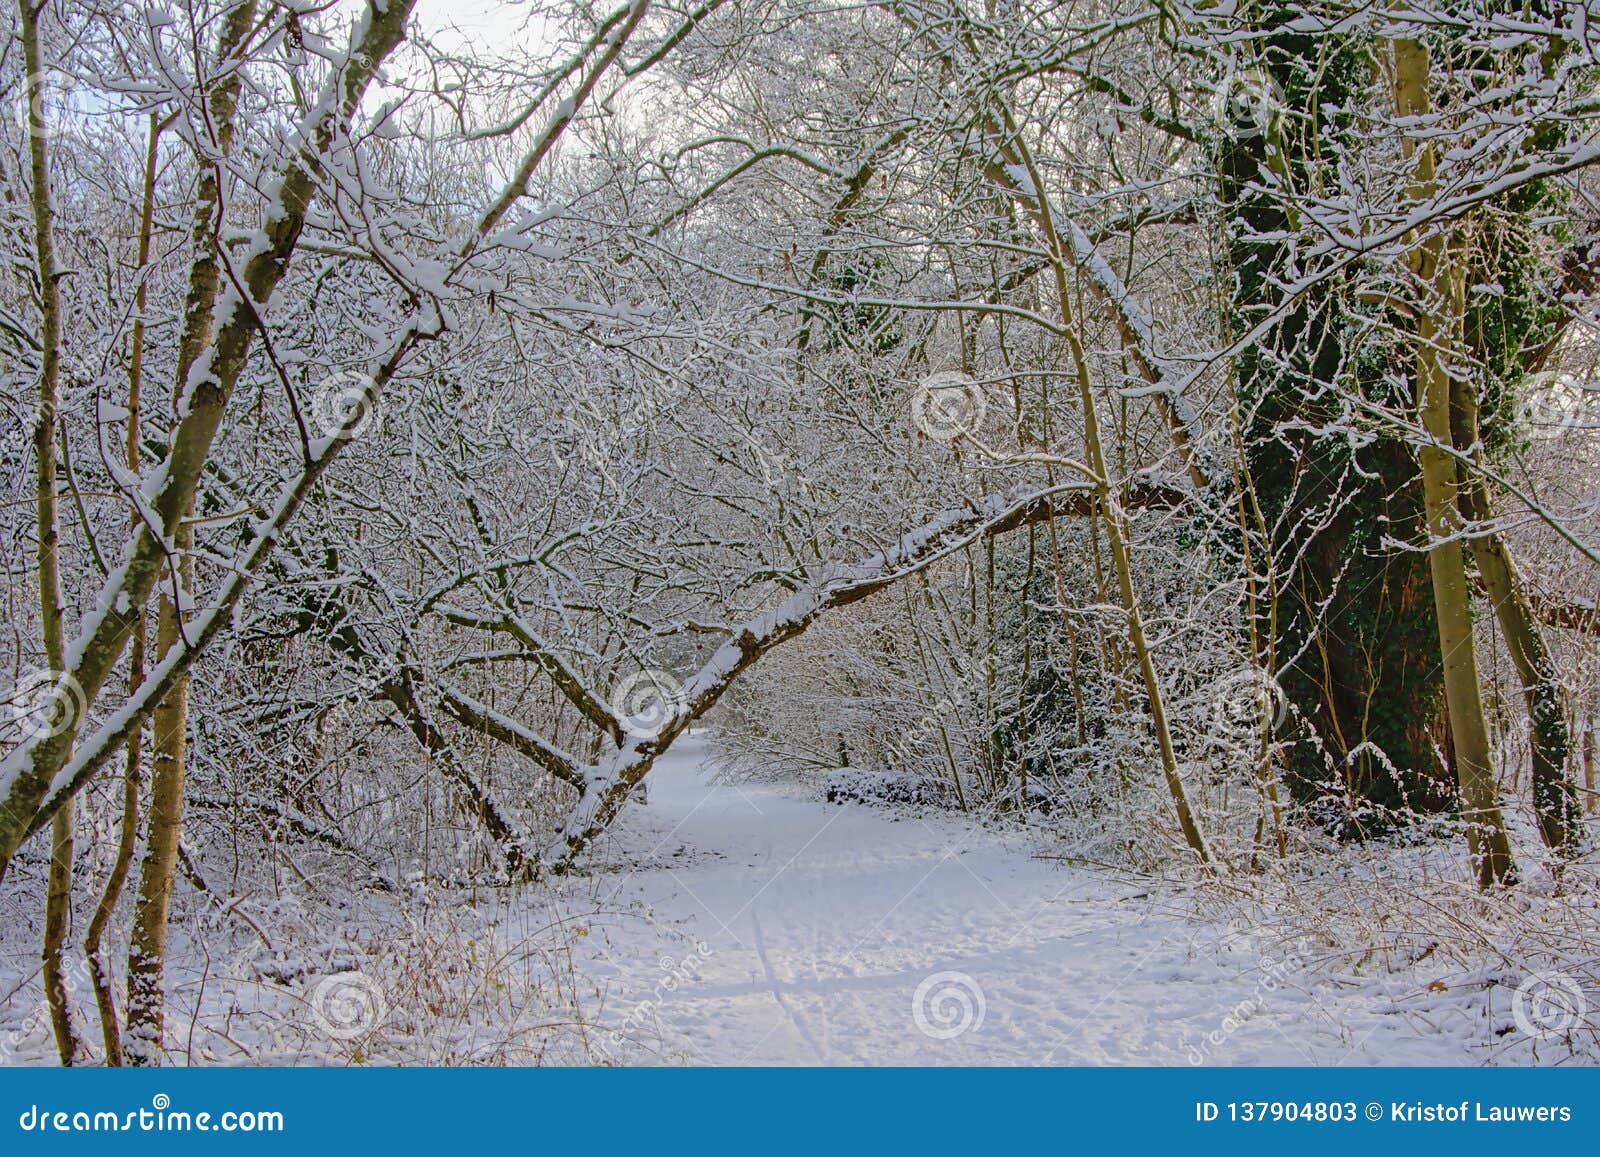 Path Through Wilderness Of Bare Winter Trees And Shrubs Covered In Snow Stock Image Image Of Arch Forest